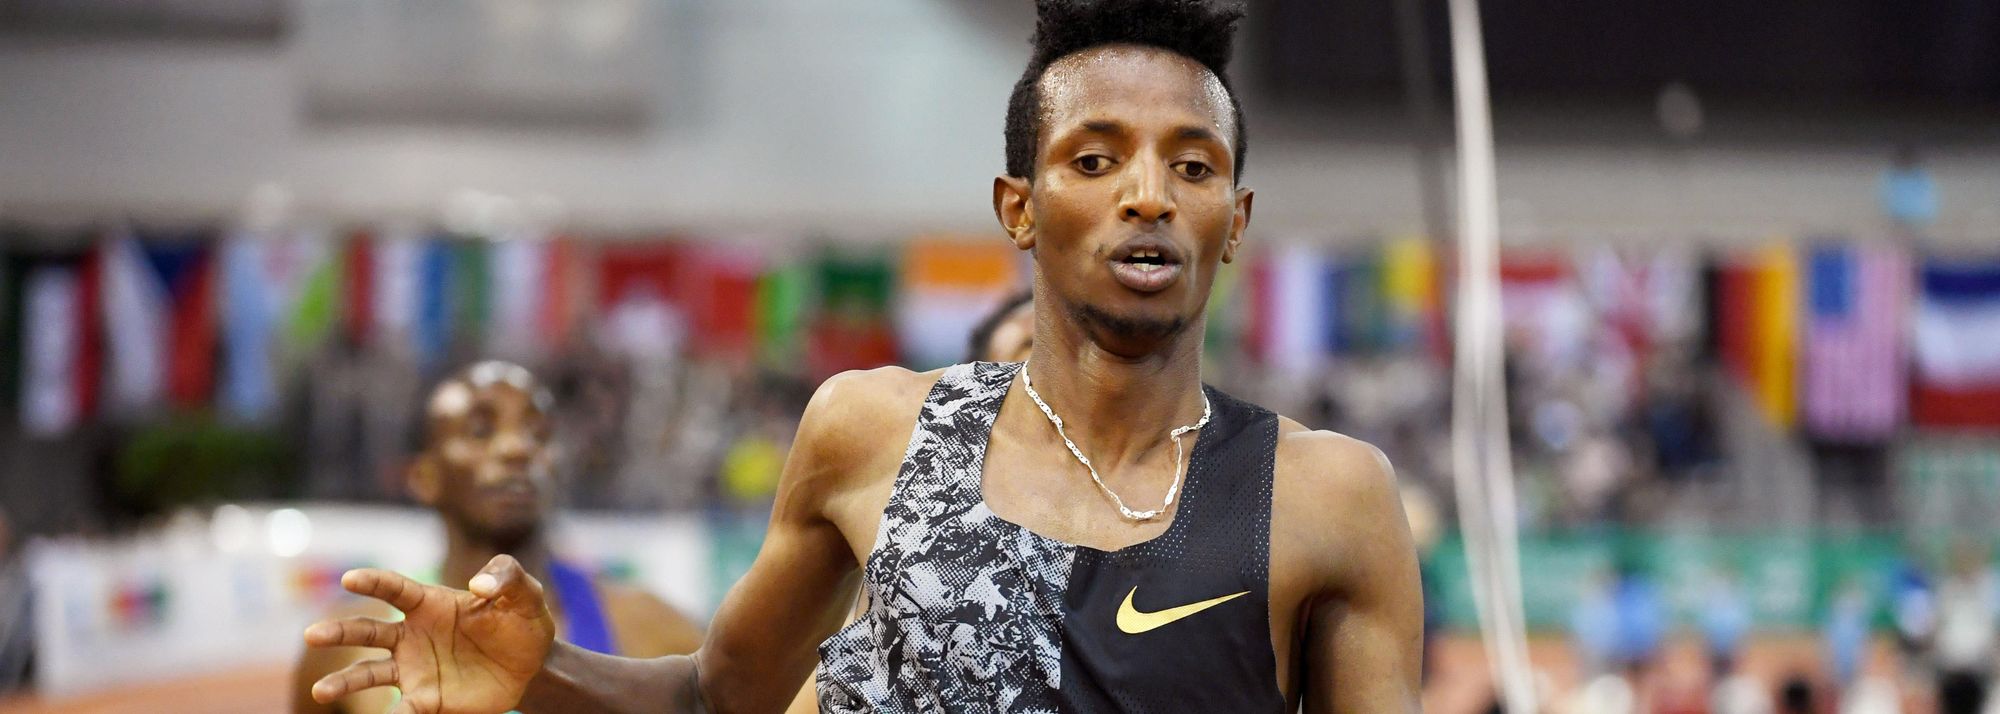 Organisers have announced that Ethiopia's Selemon Barega is to return to the Meeting Hauts-de-France Pas-de-Calais – a World Athletics Indoor Tour Gold meeting – in Lievin on 17 February, to tackle the world indoor 3000m record.